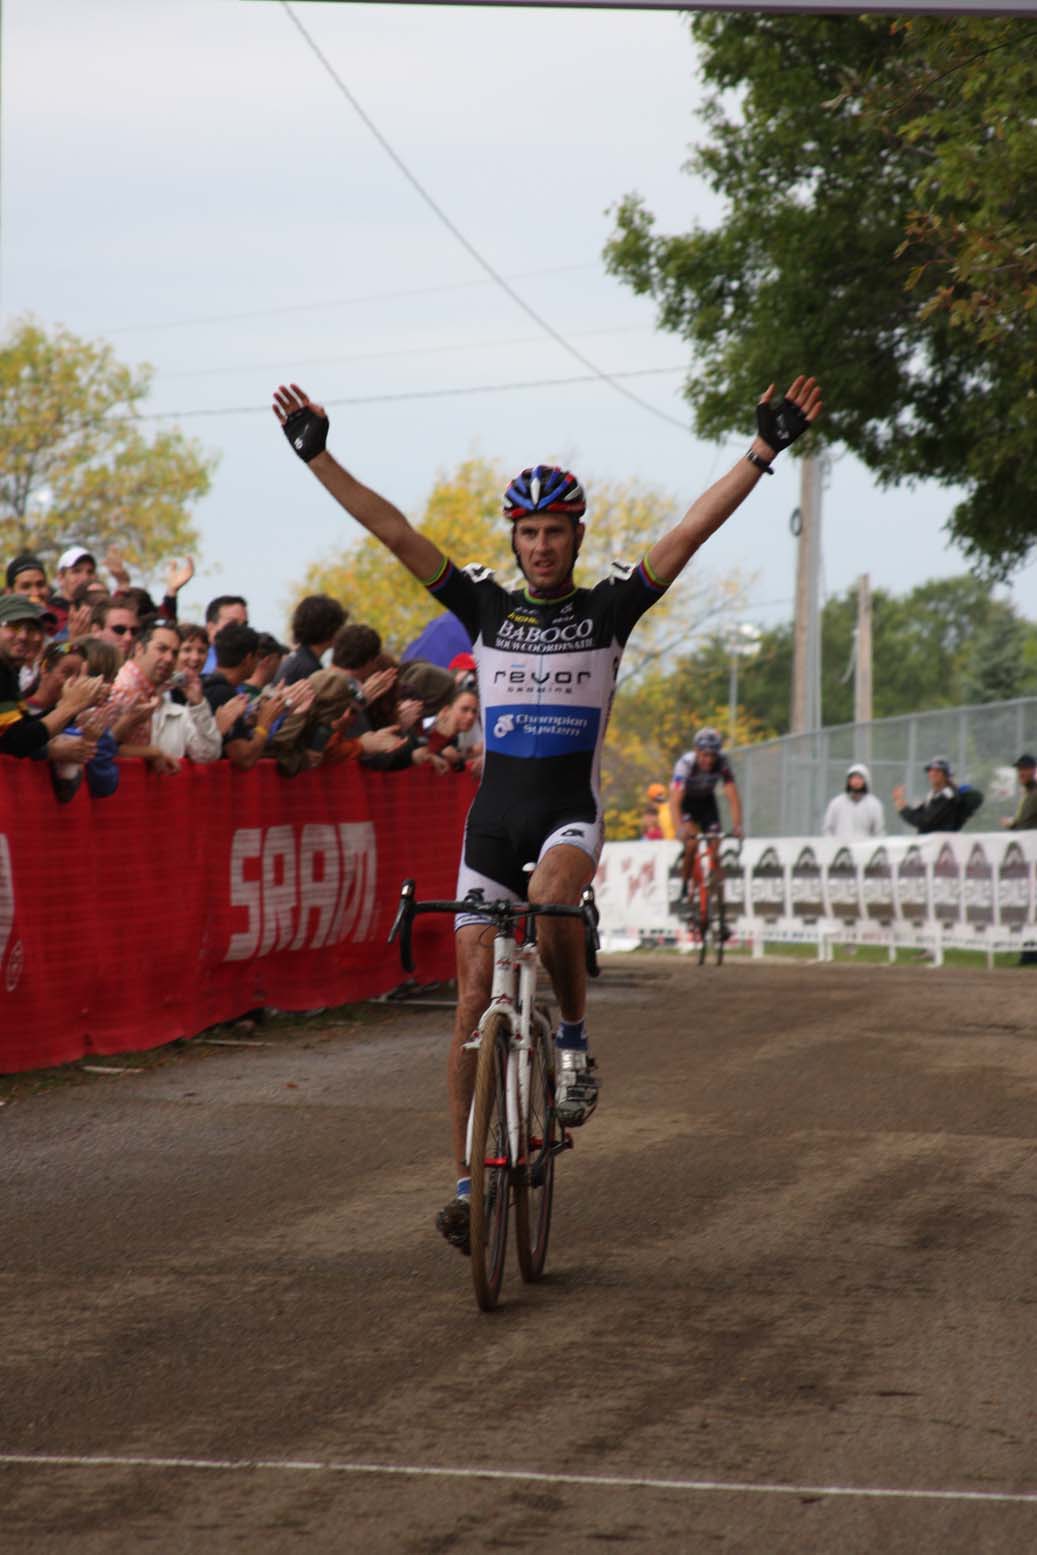 Erwin Vervecken took his only win of his American tour. by Amy Dykema